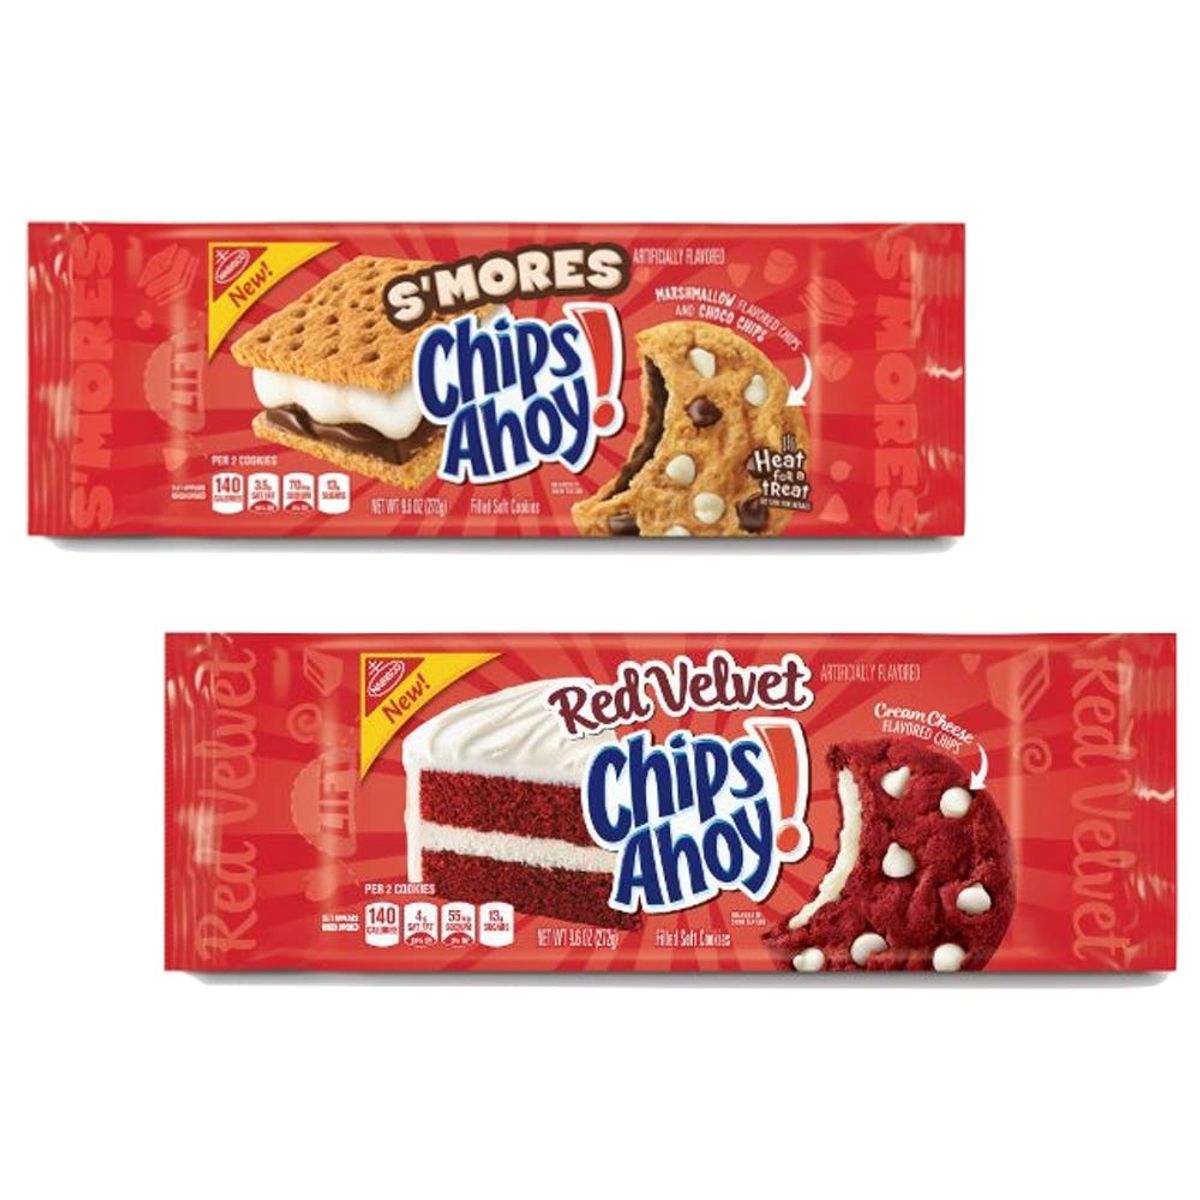 New S’mores and Red Velvet Chips Ahoy Flavors Will Make Your Summer